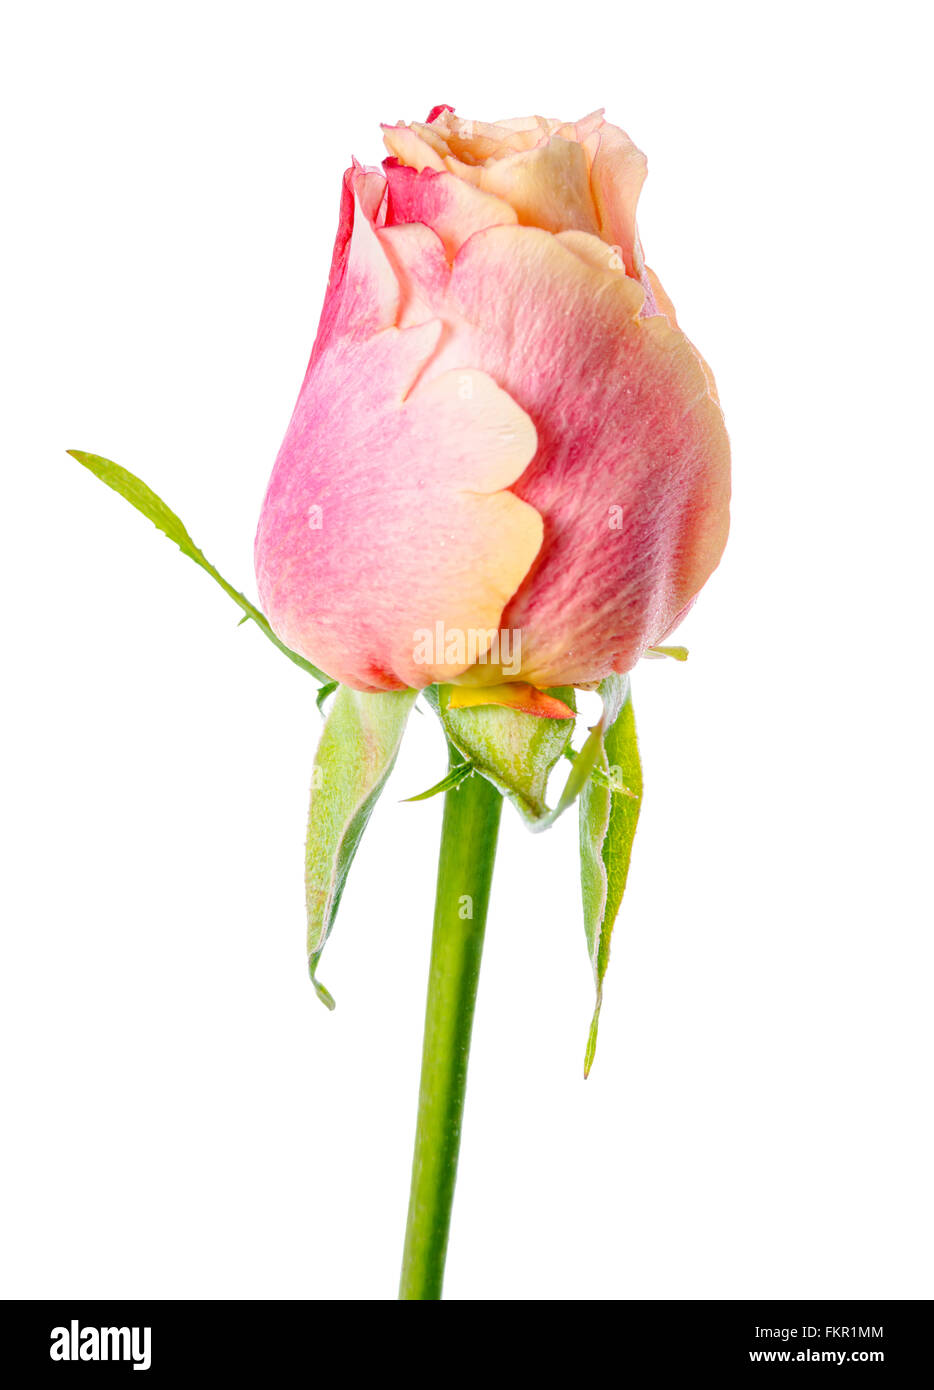 close up of abstract romantic beautiful yellow and pink rose flower bud is isolated on white background Stock Photo